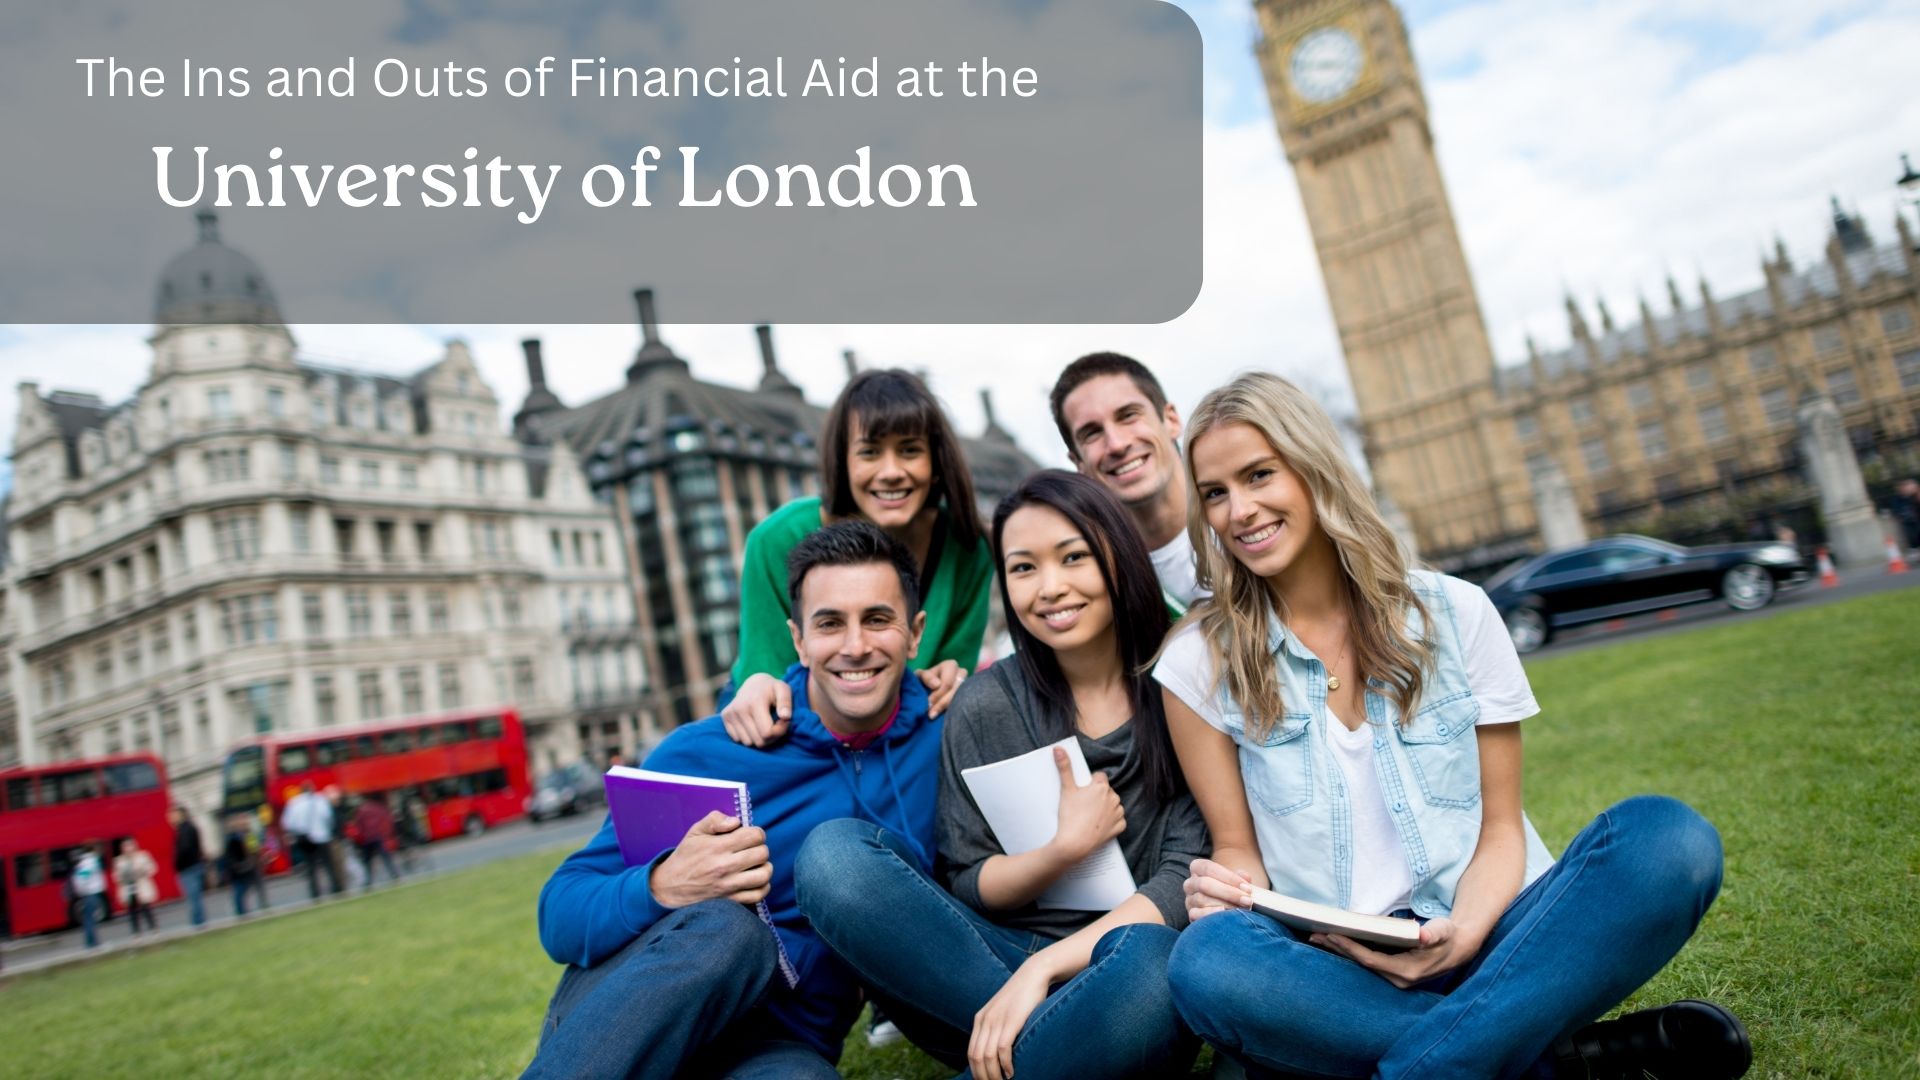 The Ins and Outs of Financial Aid at the University of London